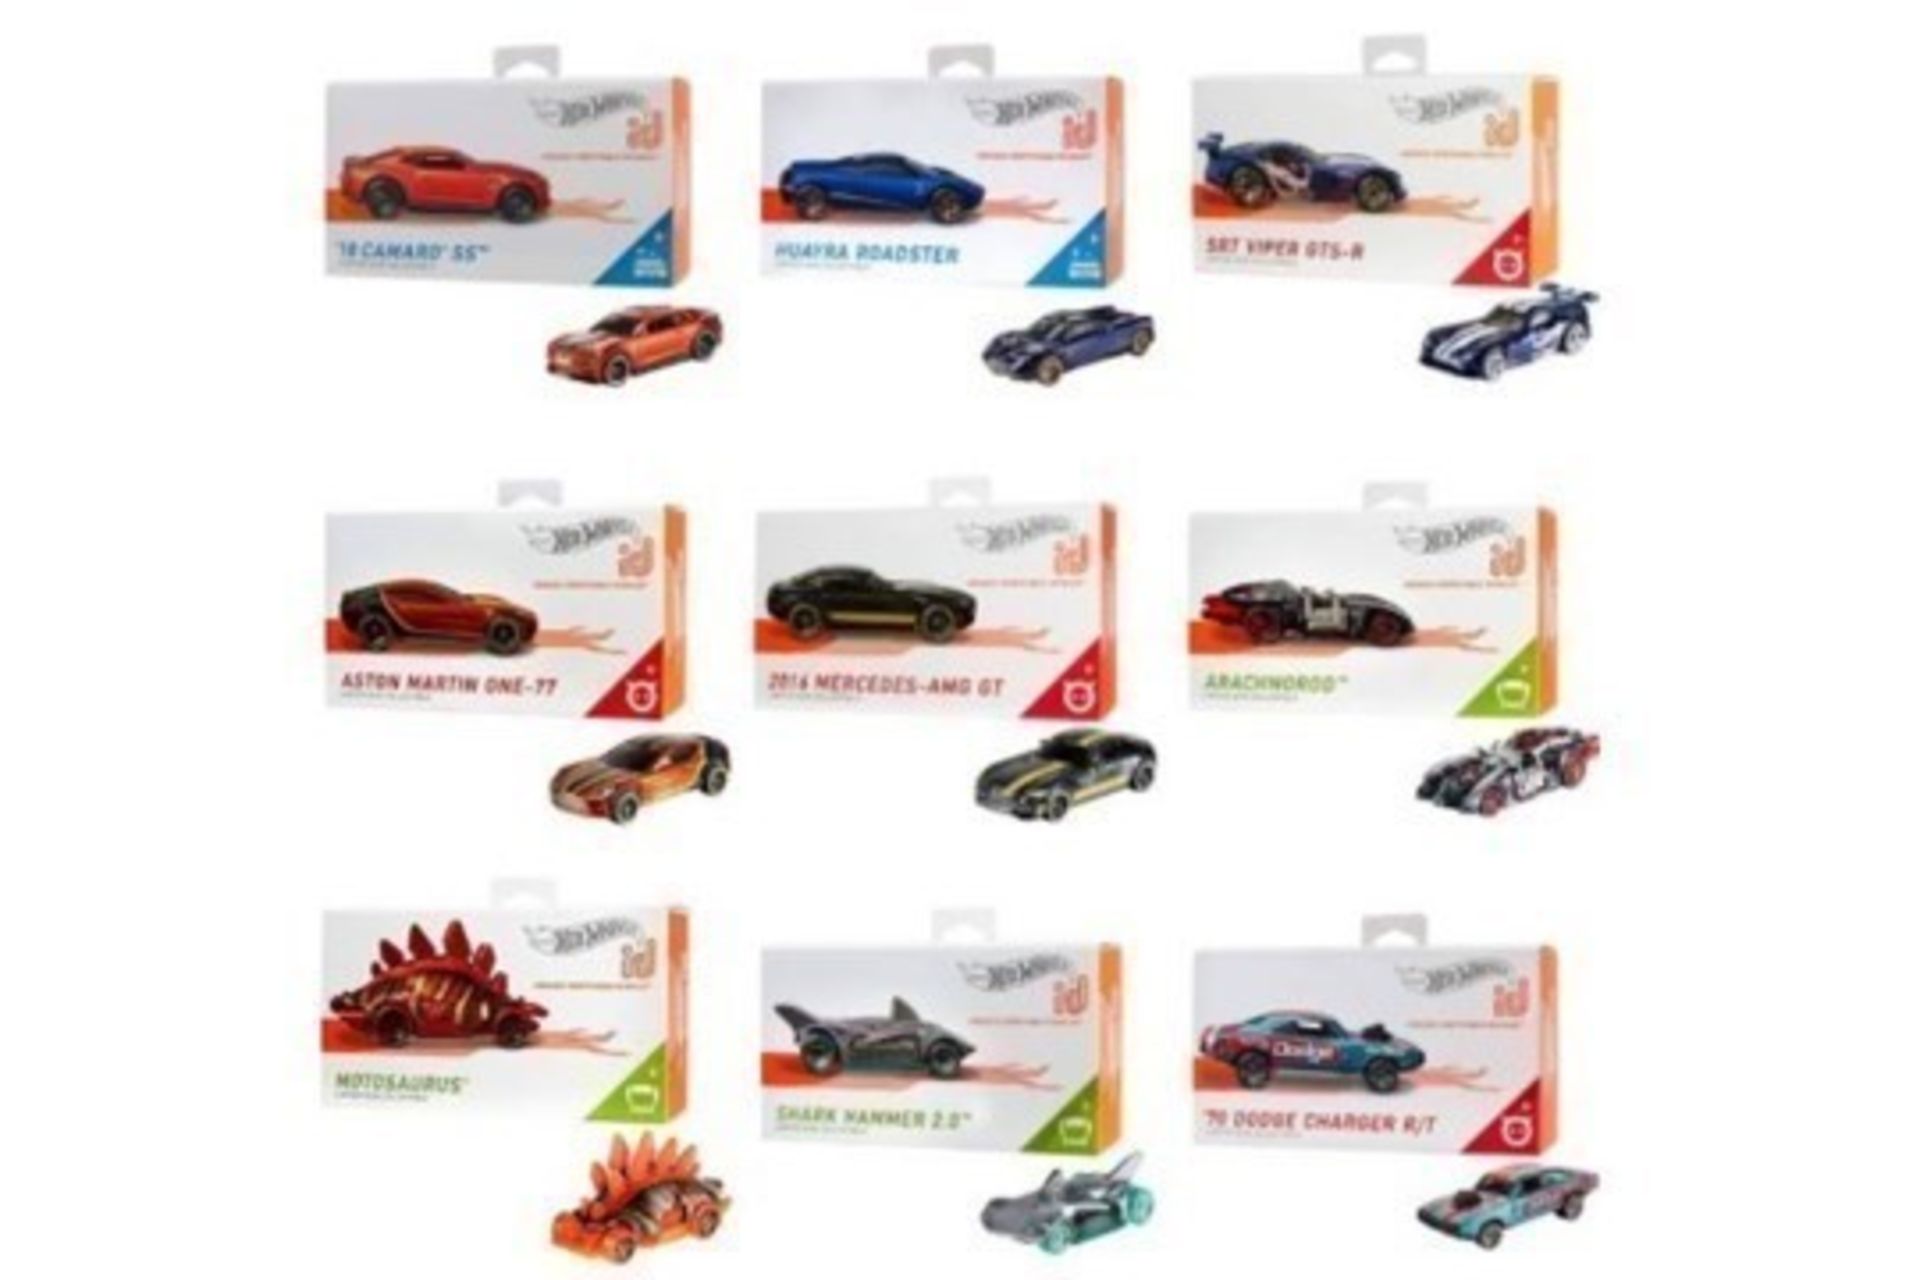 Hot Wheels Uniquely Identifiable Track Vehicles Co